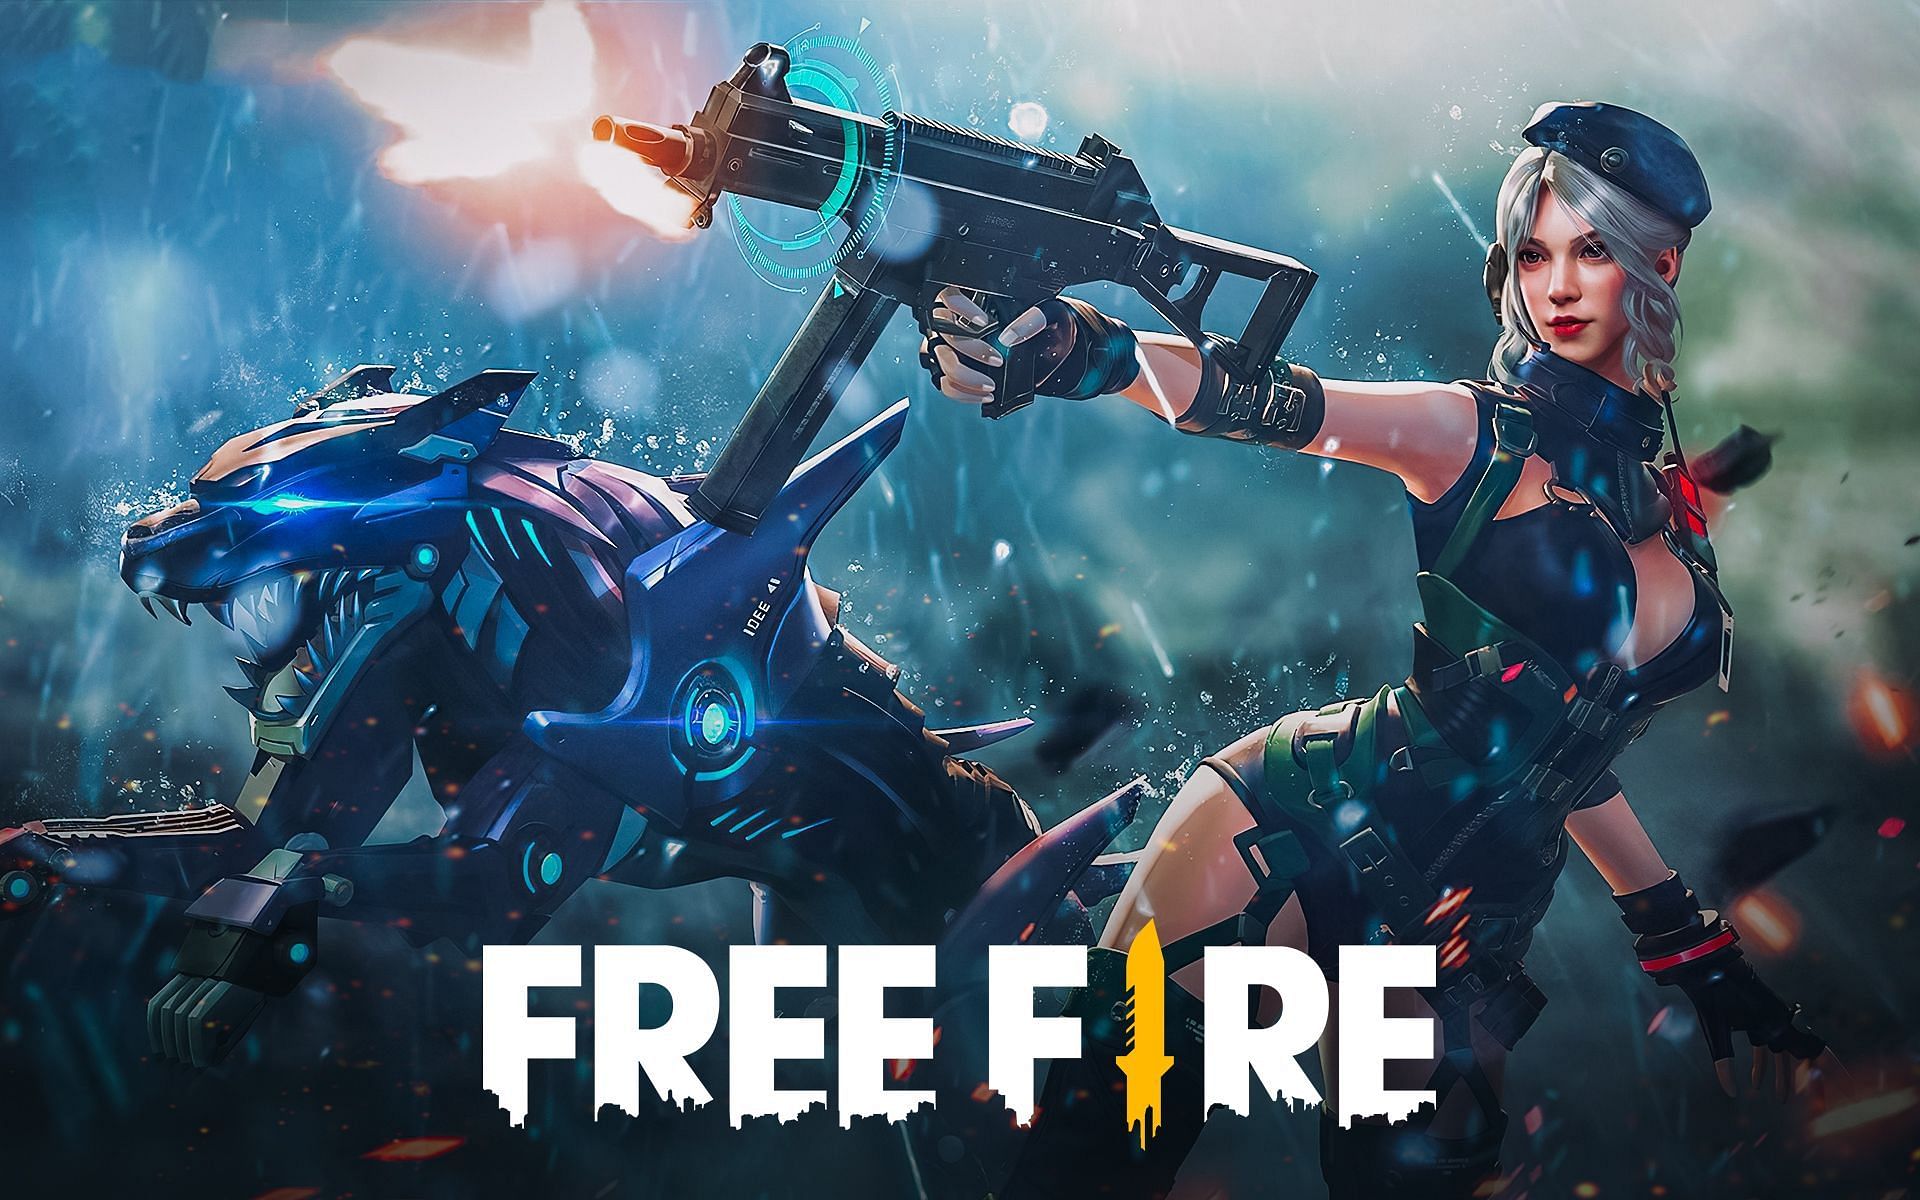 Release dates of Free Fire OB31 update, Clash Squad season, and more (Image via Free Fire)